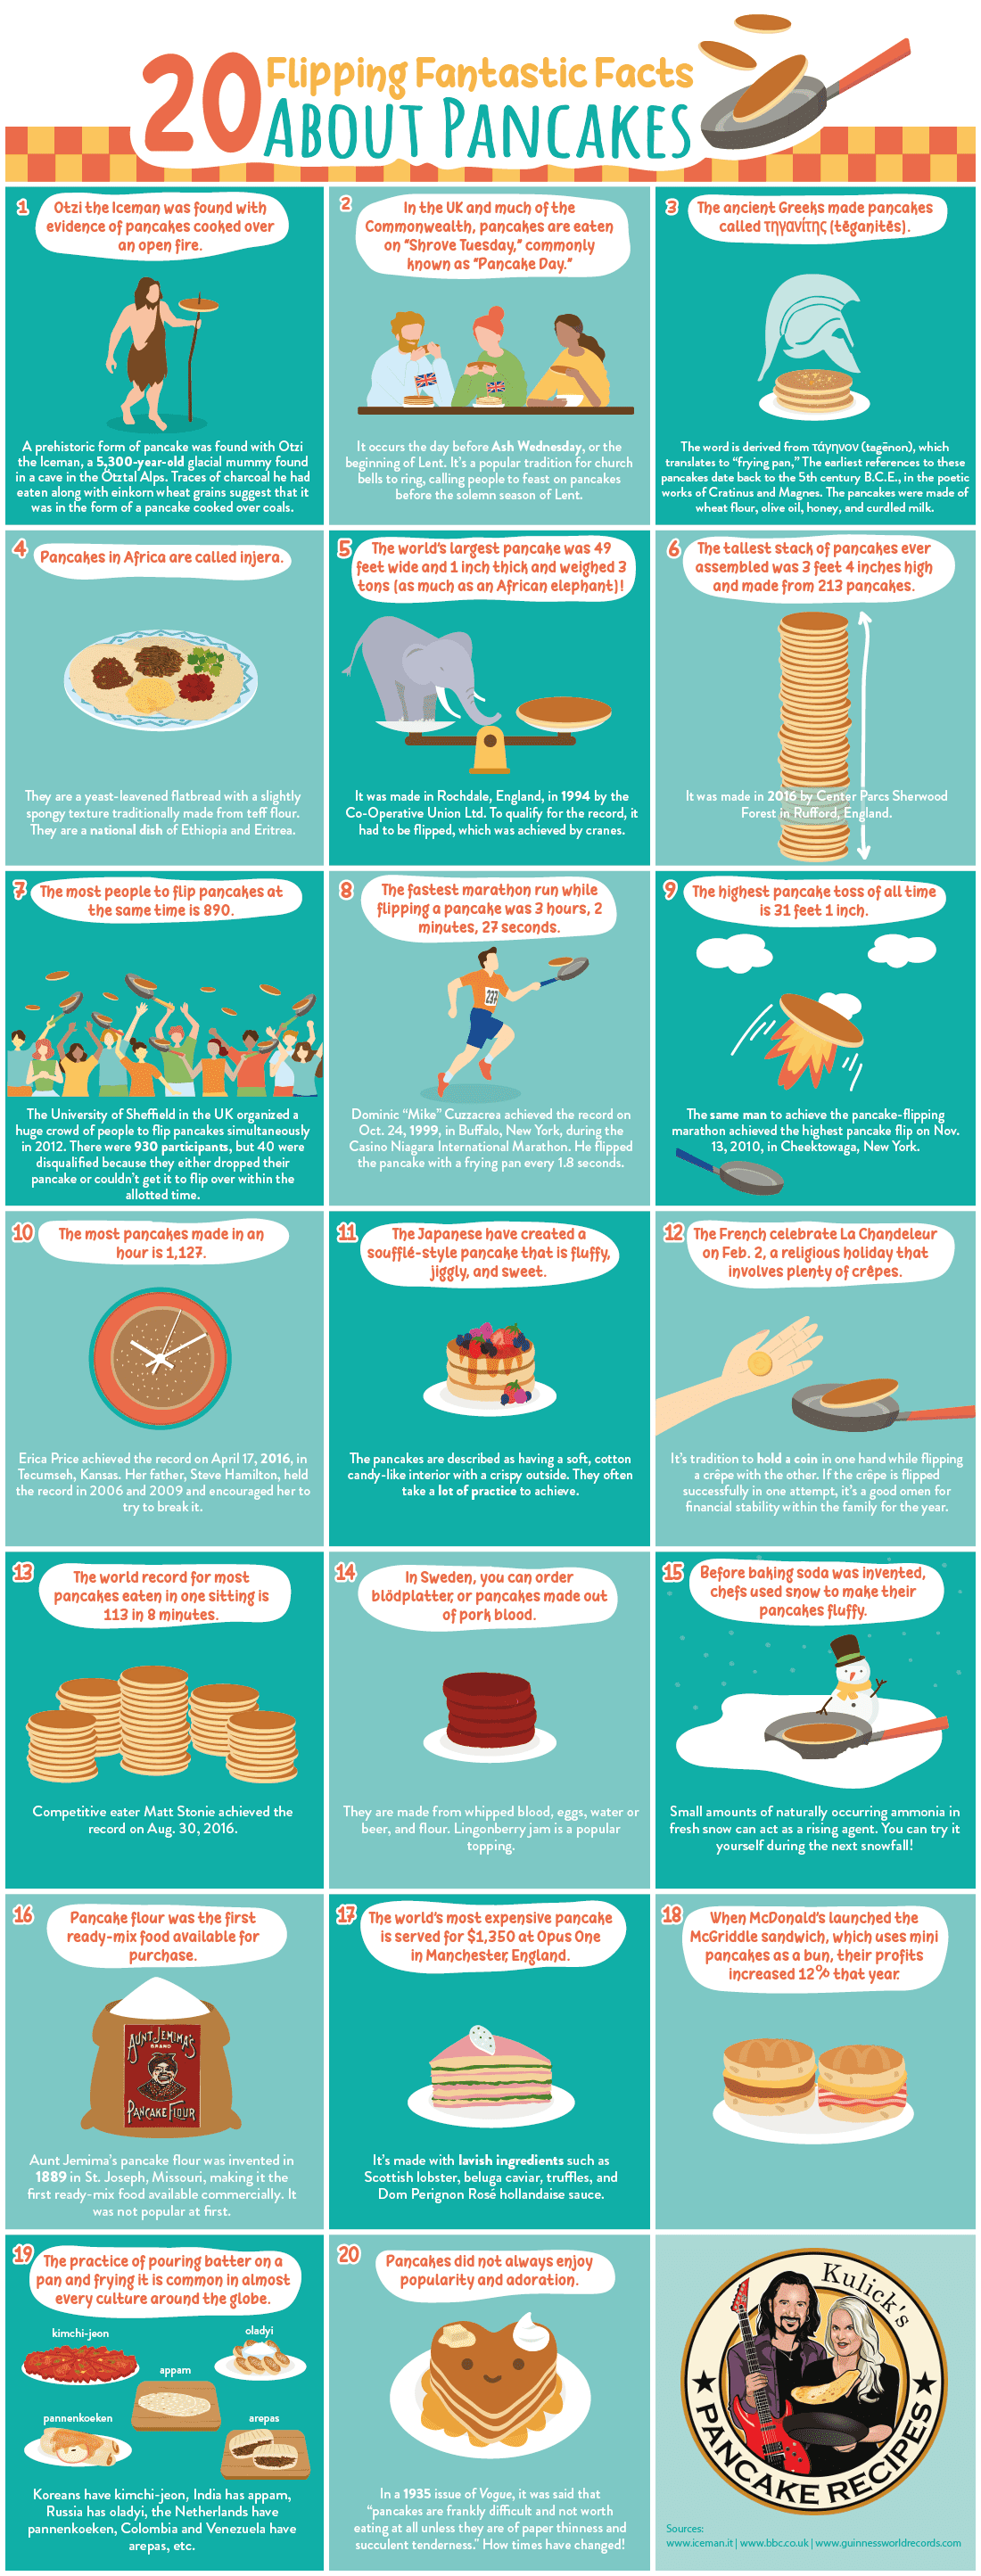 facts-about-pancakes-2